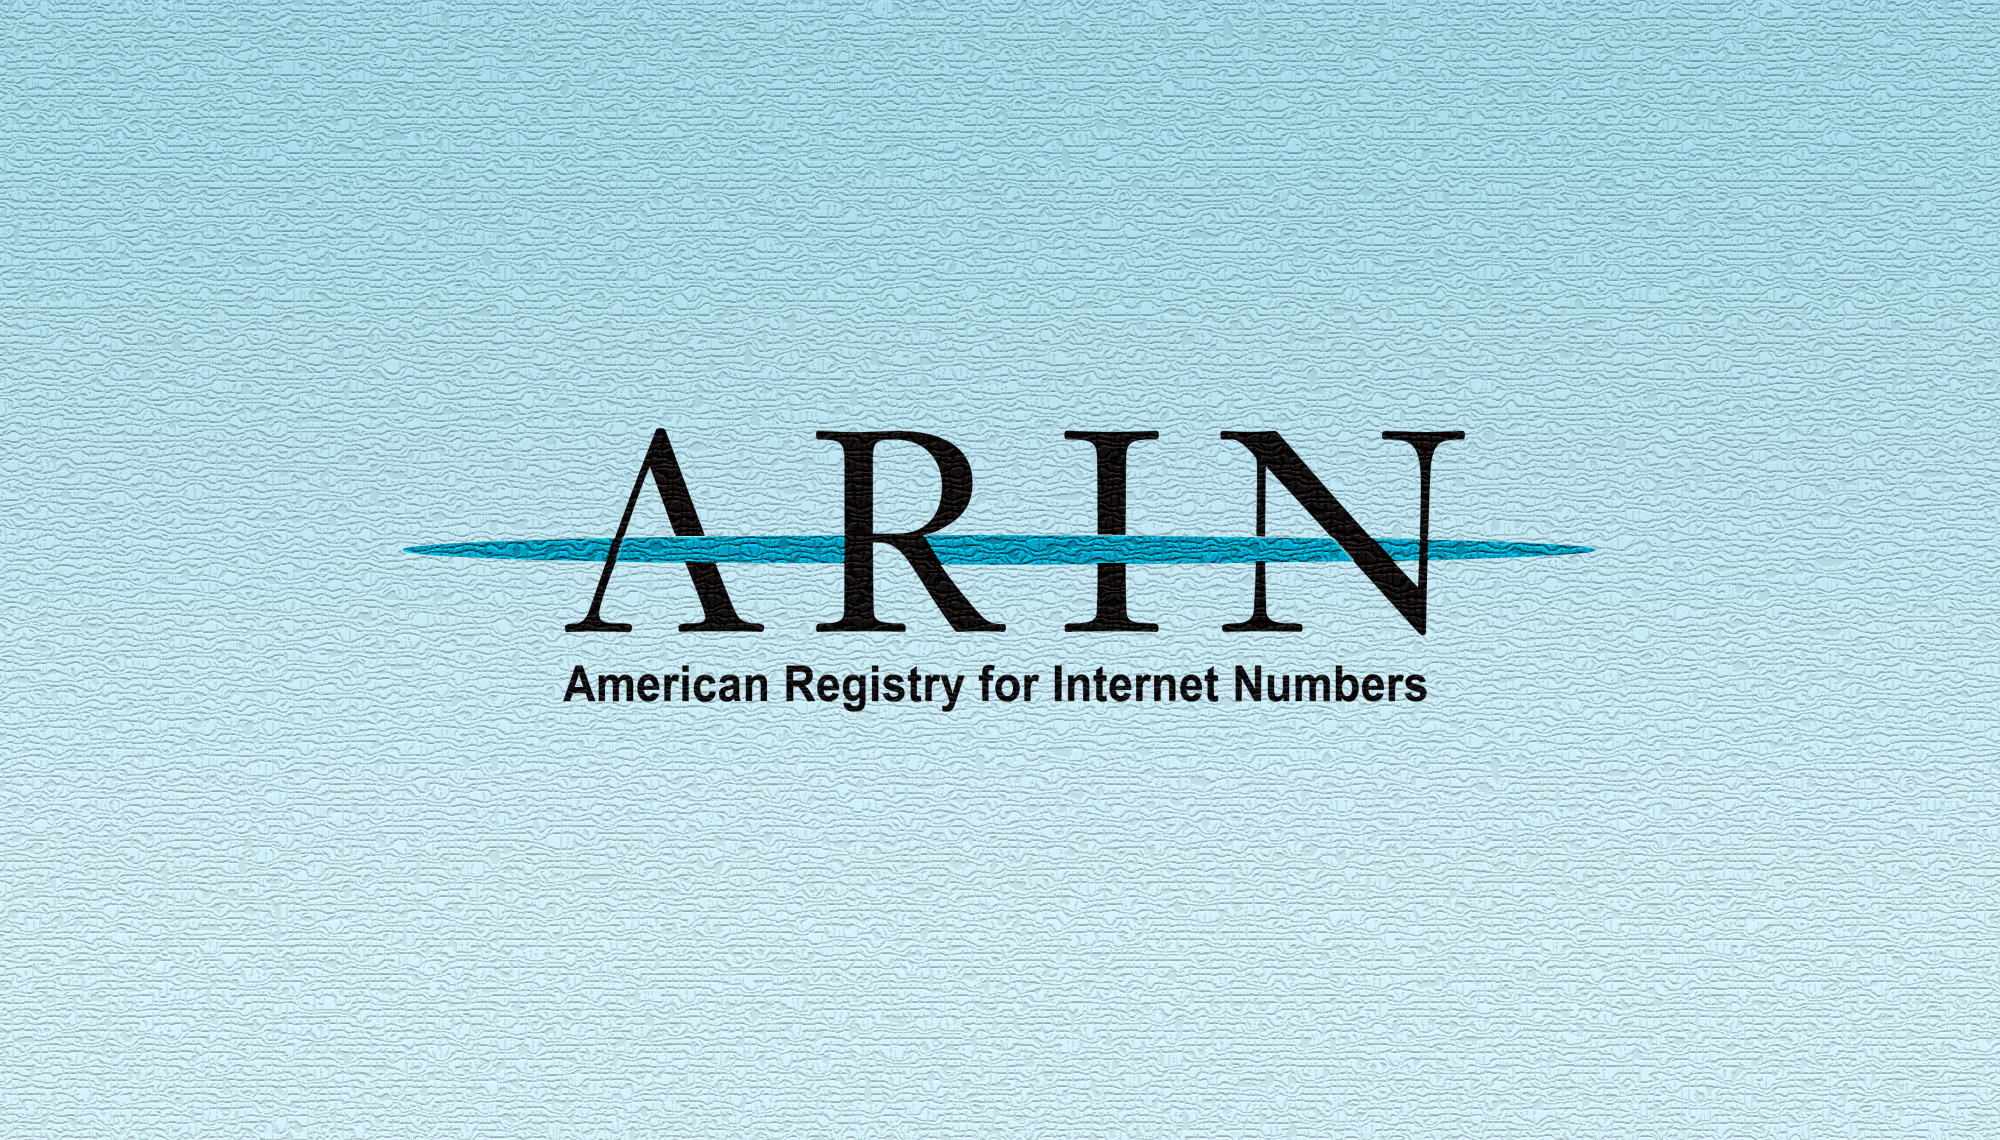 Meet us on the Road: Is ARIN Headed to a Town Near You?